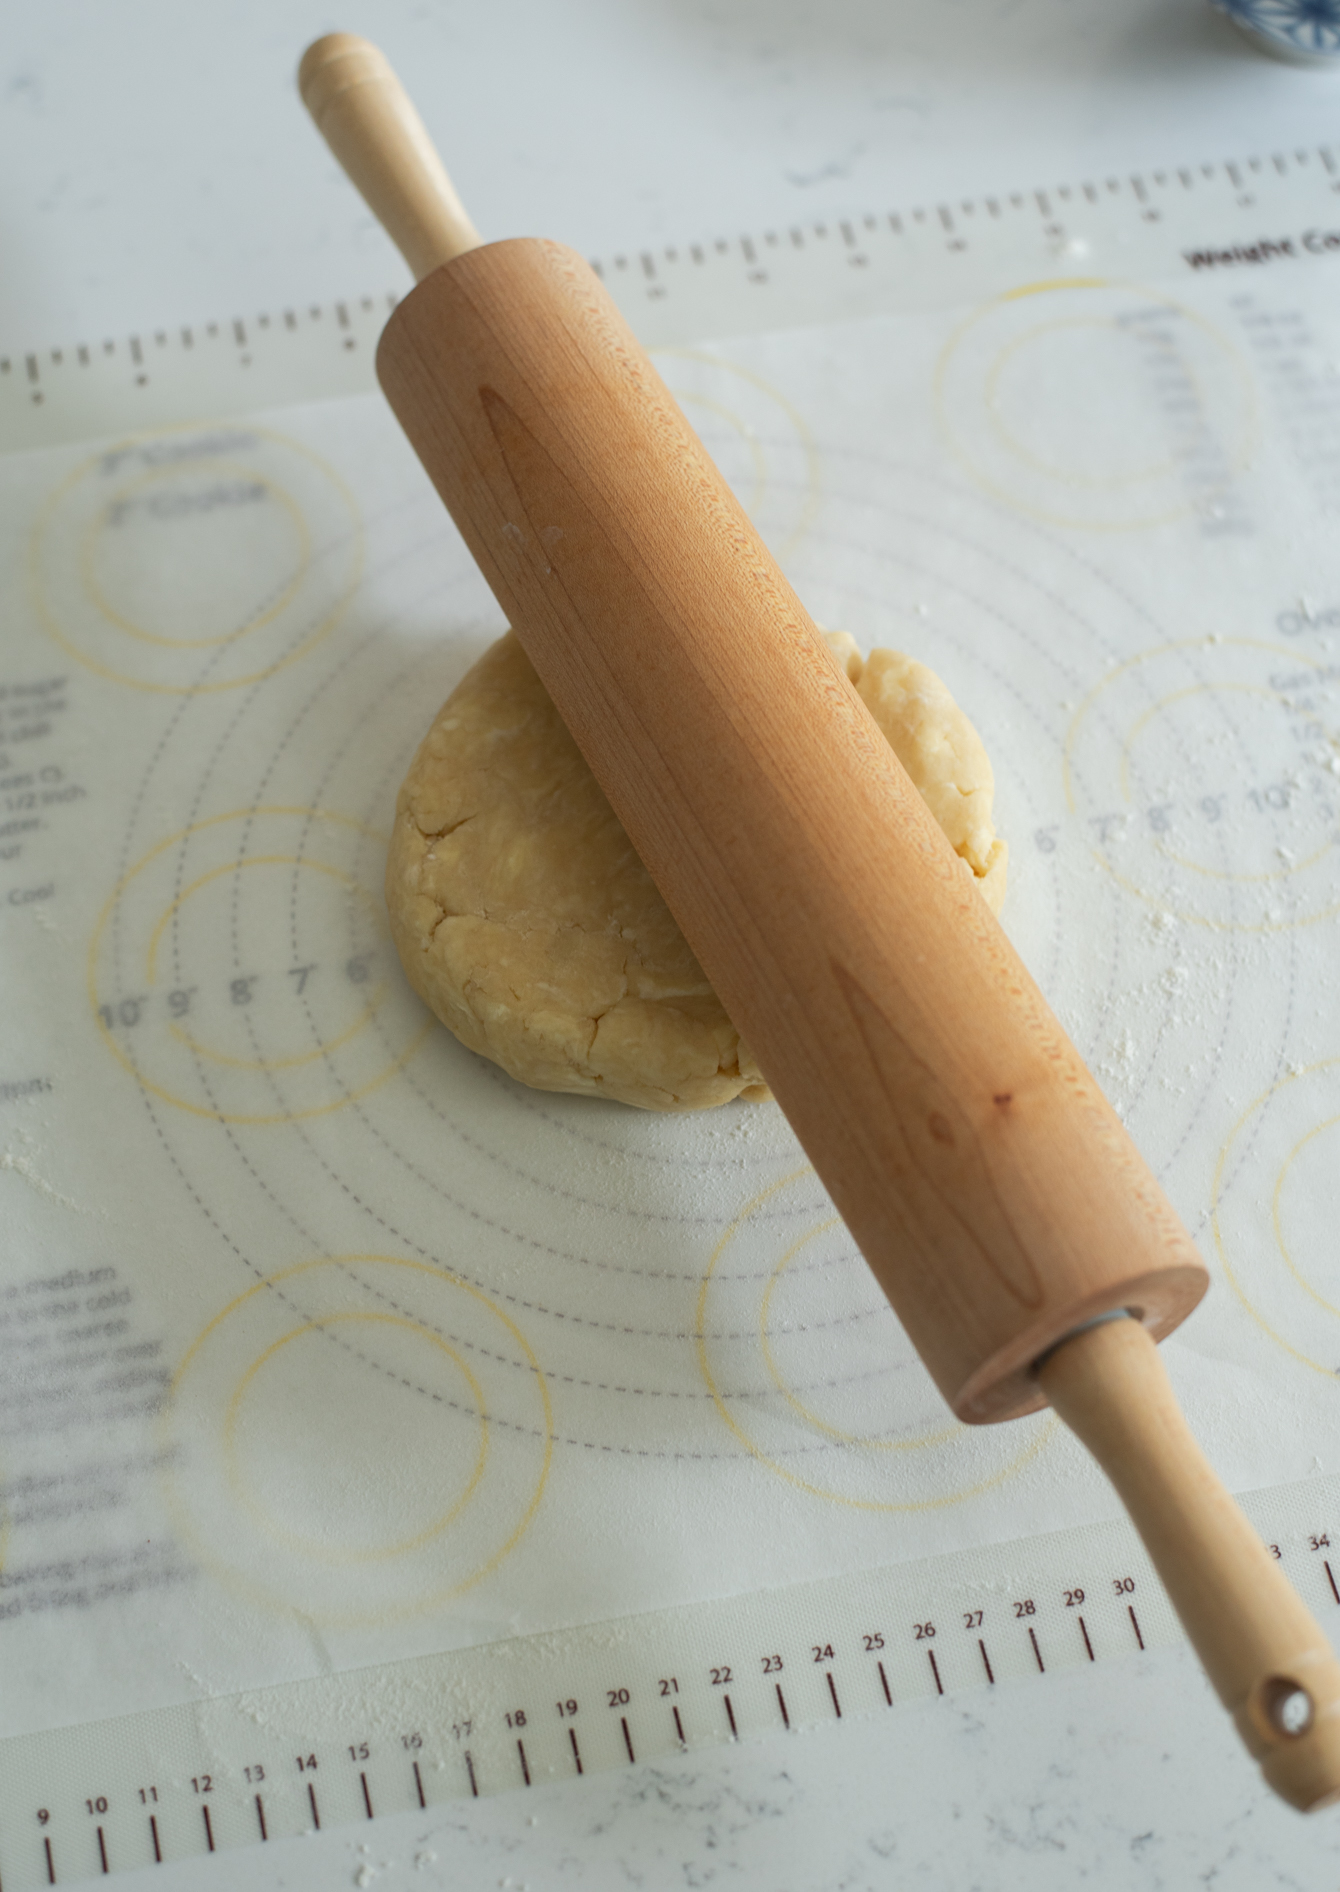 A rolling pin is starting to roll out the firm pie dough on the baking mat.